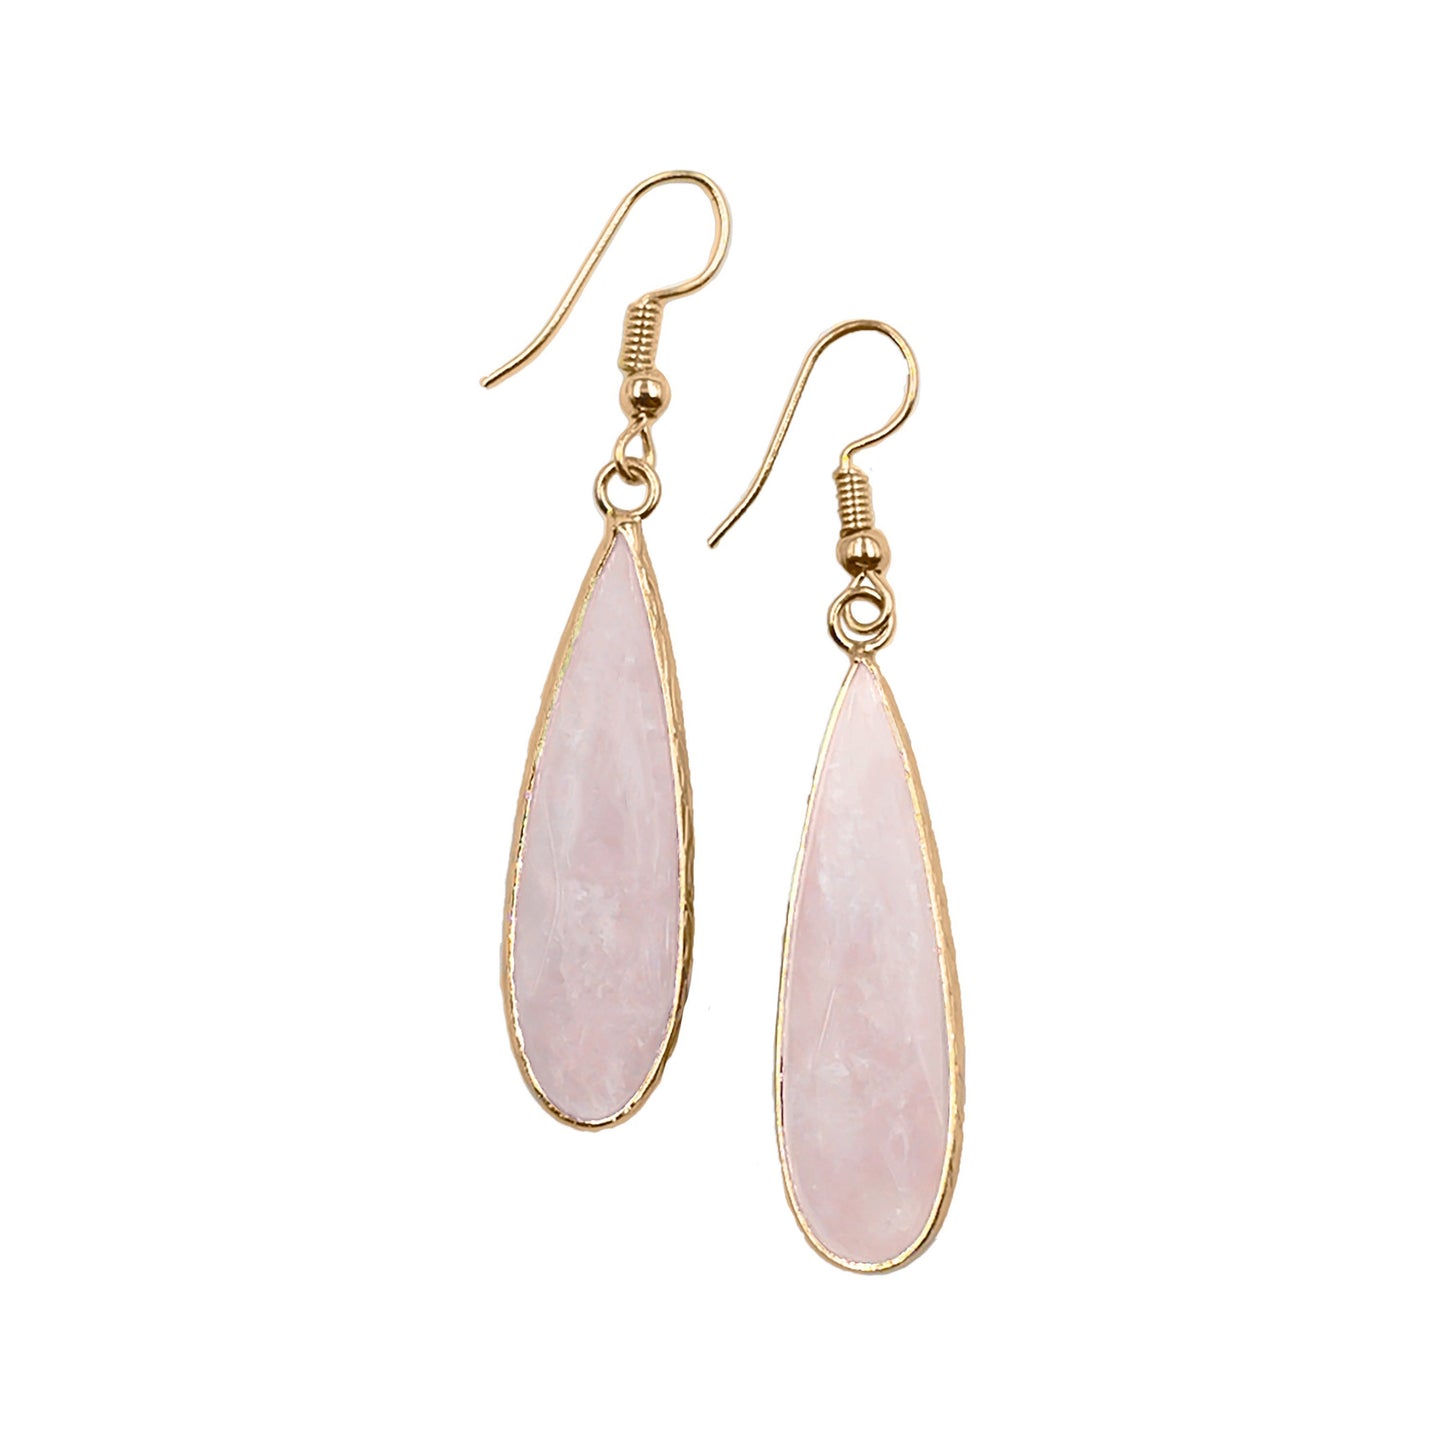 Darcy Collection - Ballet Earrings